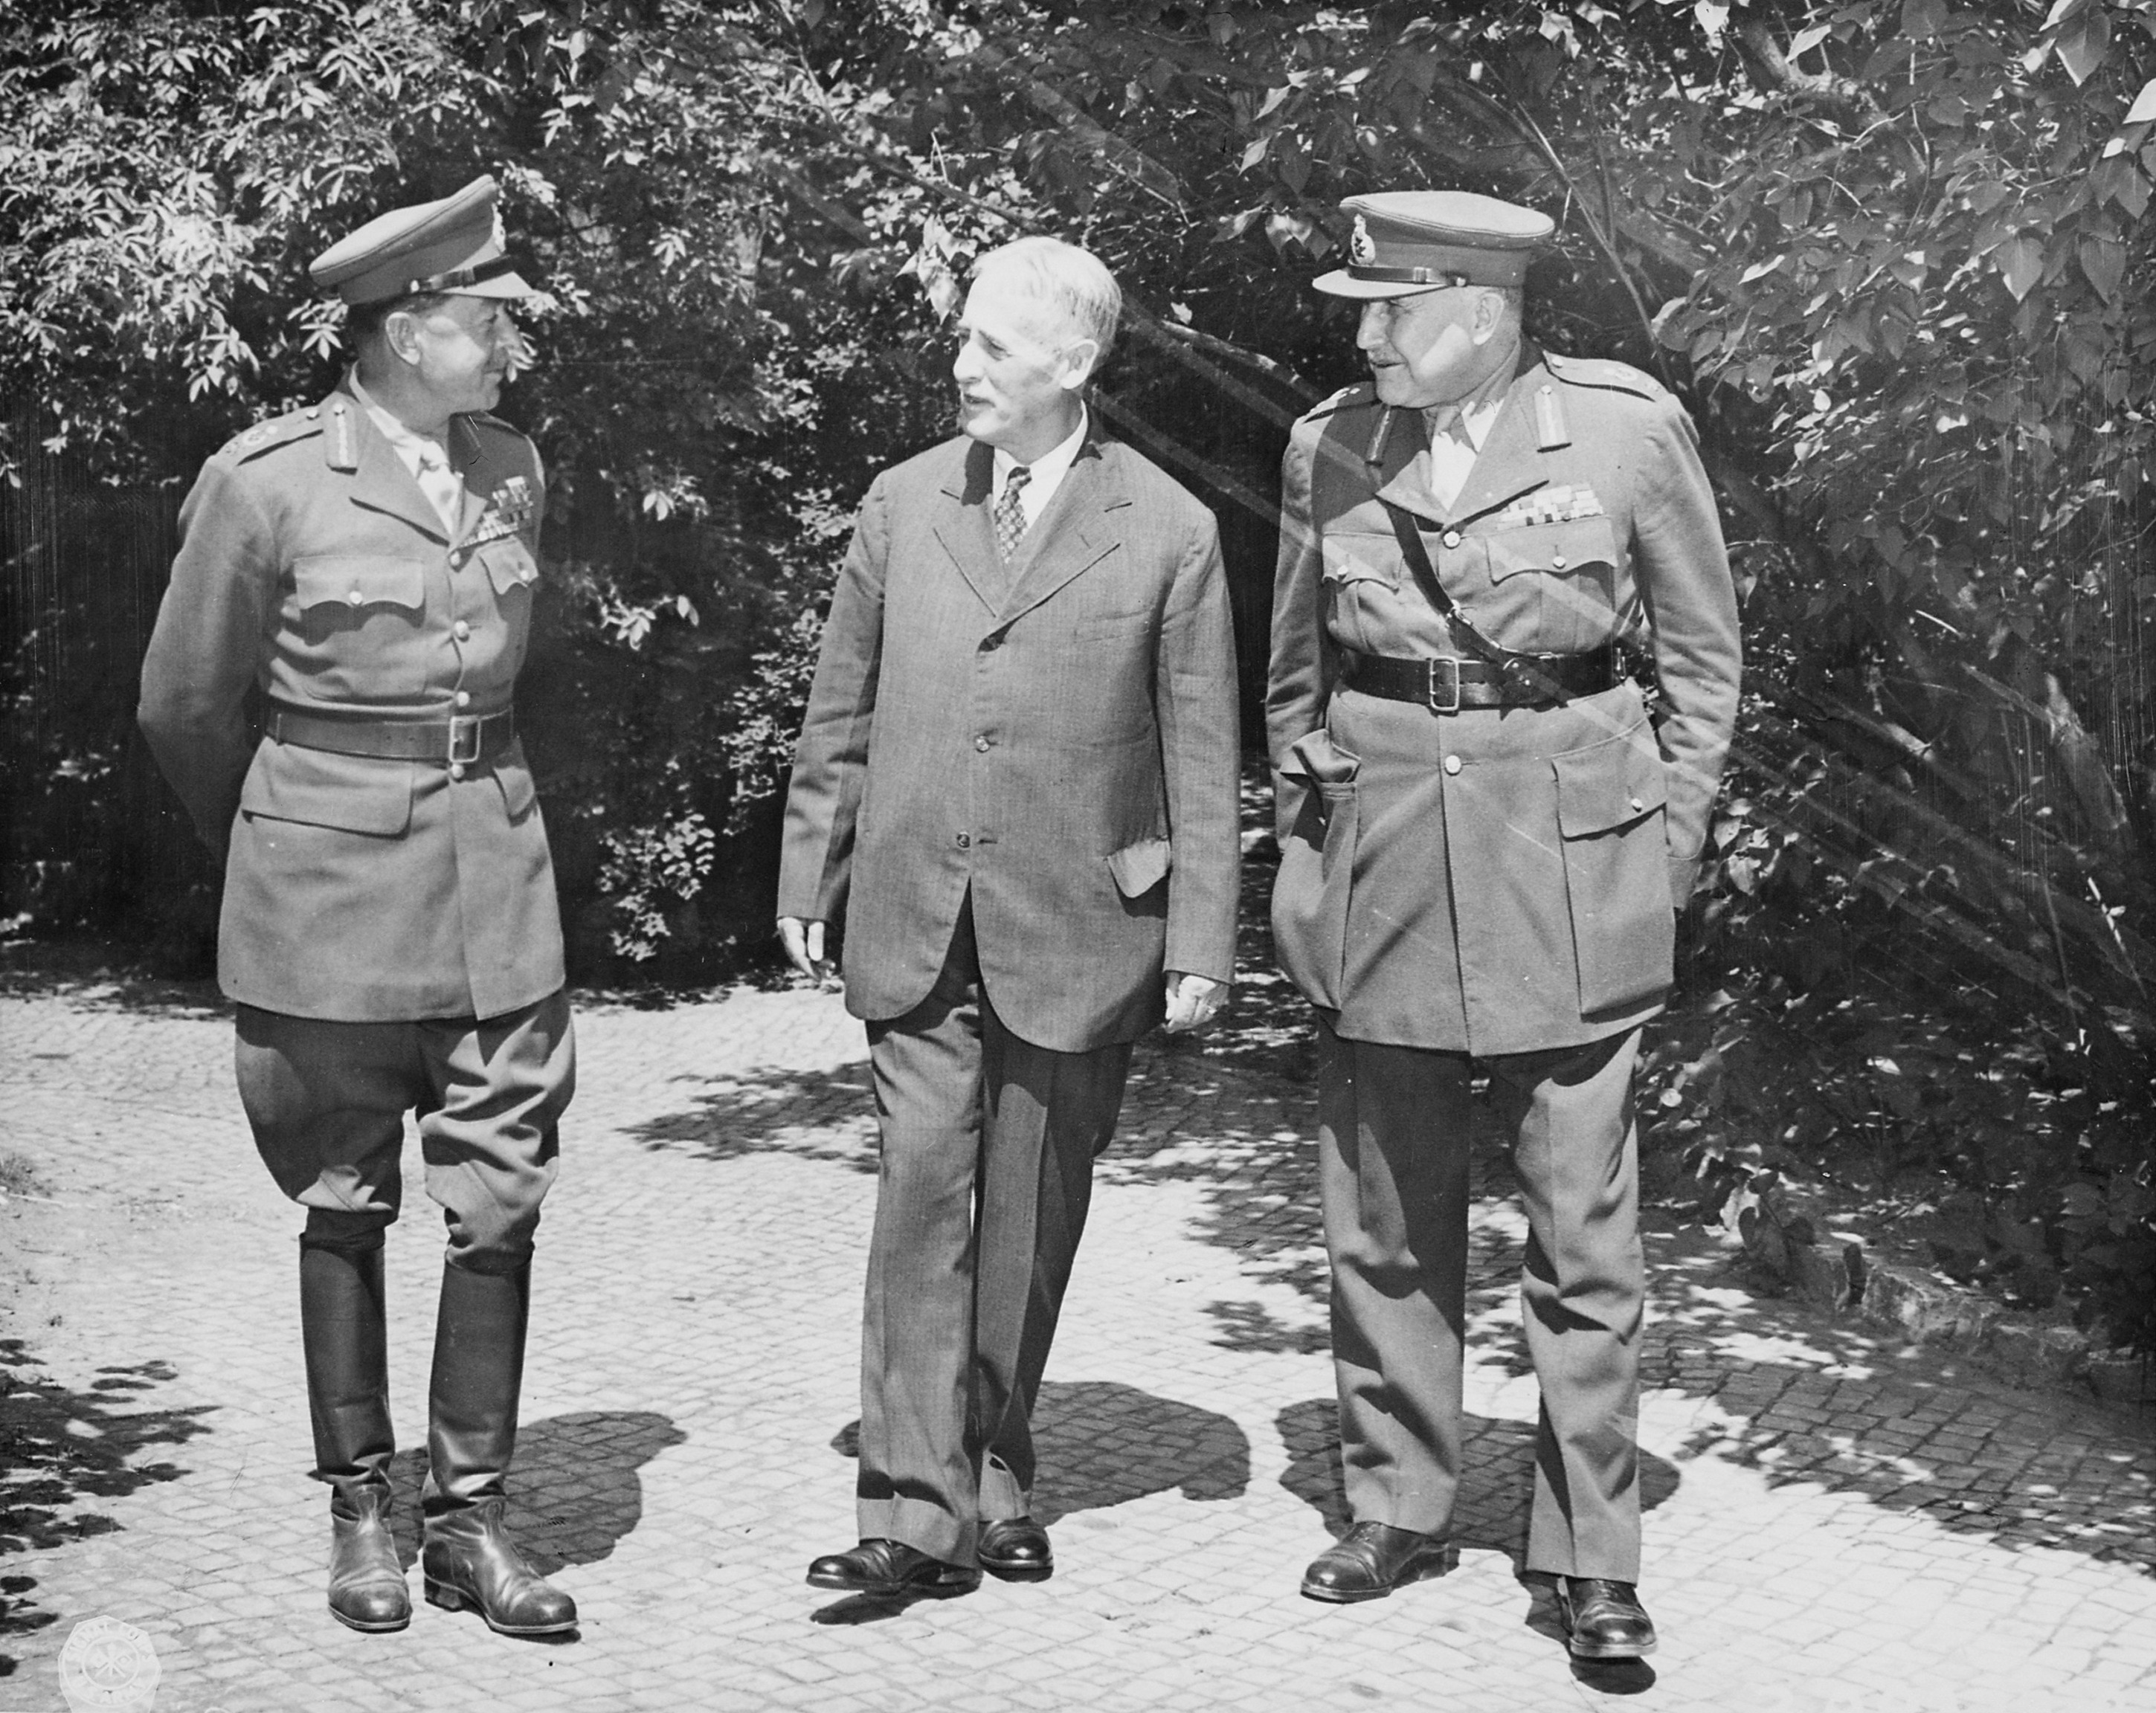 Harold Alexander, Henry Stimson, and Henry Wilson during the Potsdam Conference, Germany, 19 Jul 1945